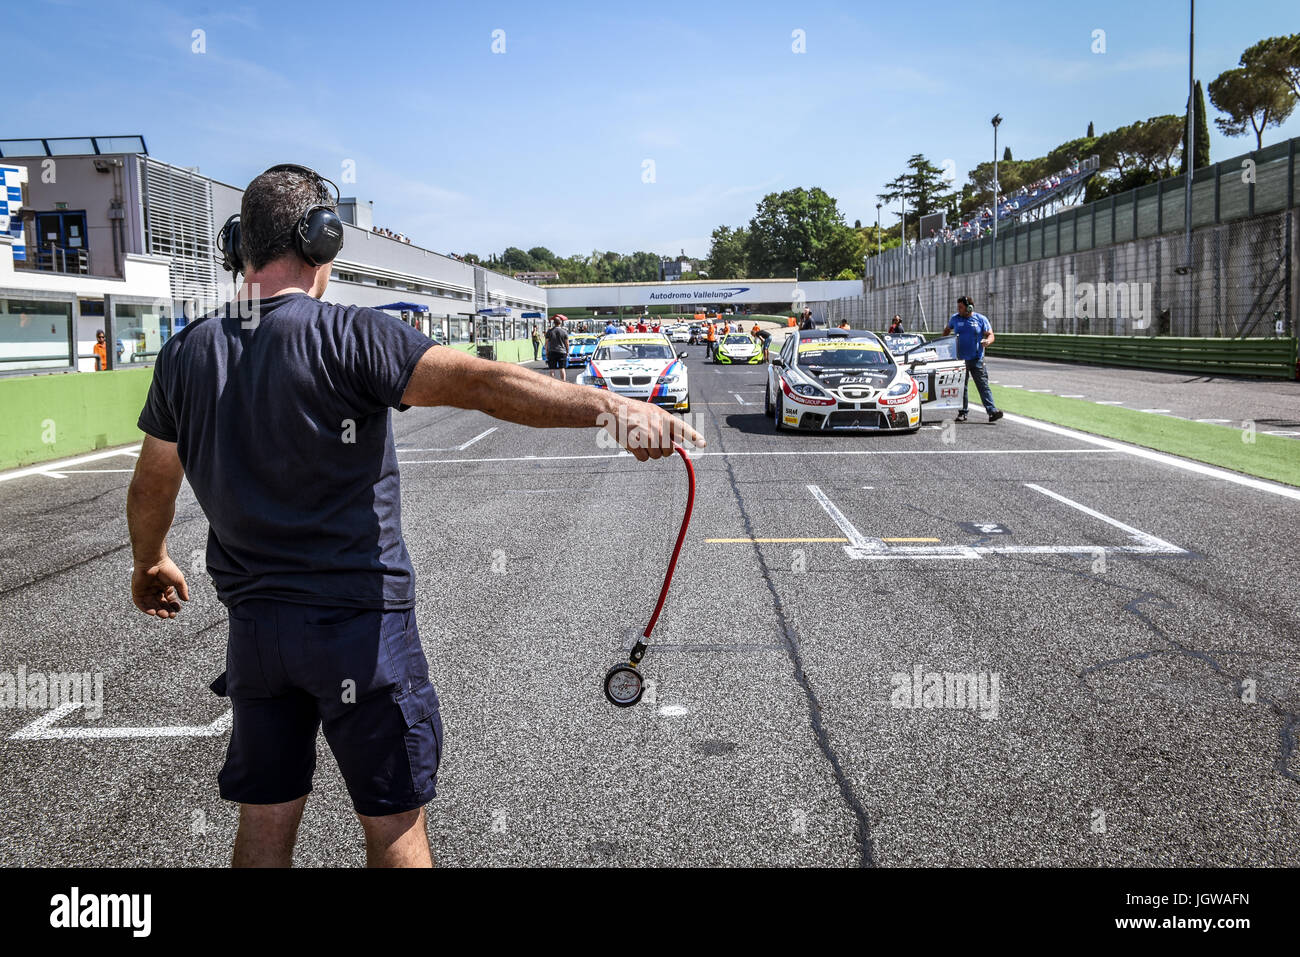 Italian Super Cup cars positioning on starting grid, mechaninc point out position to Bmw car Stock Photo